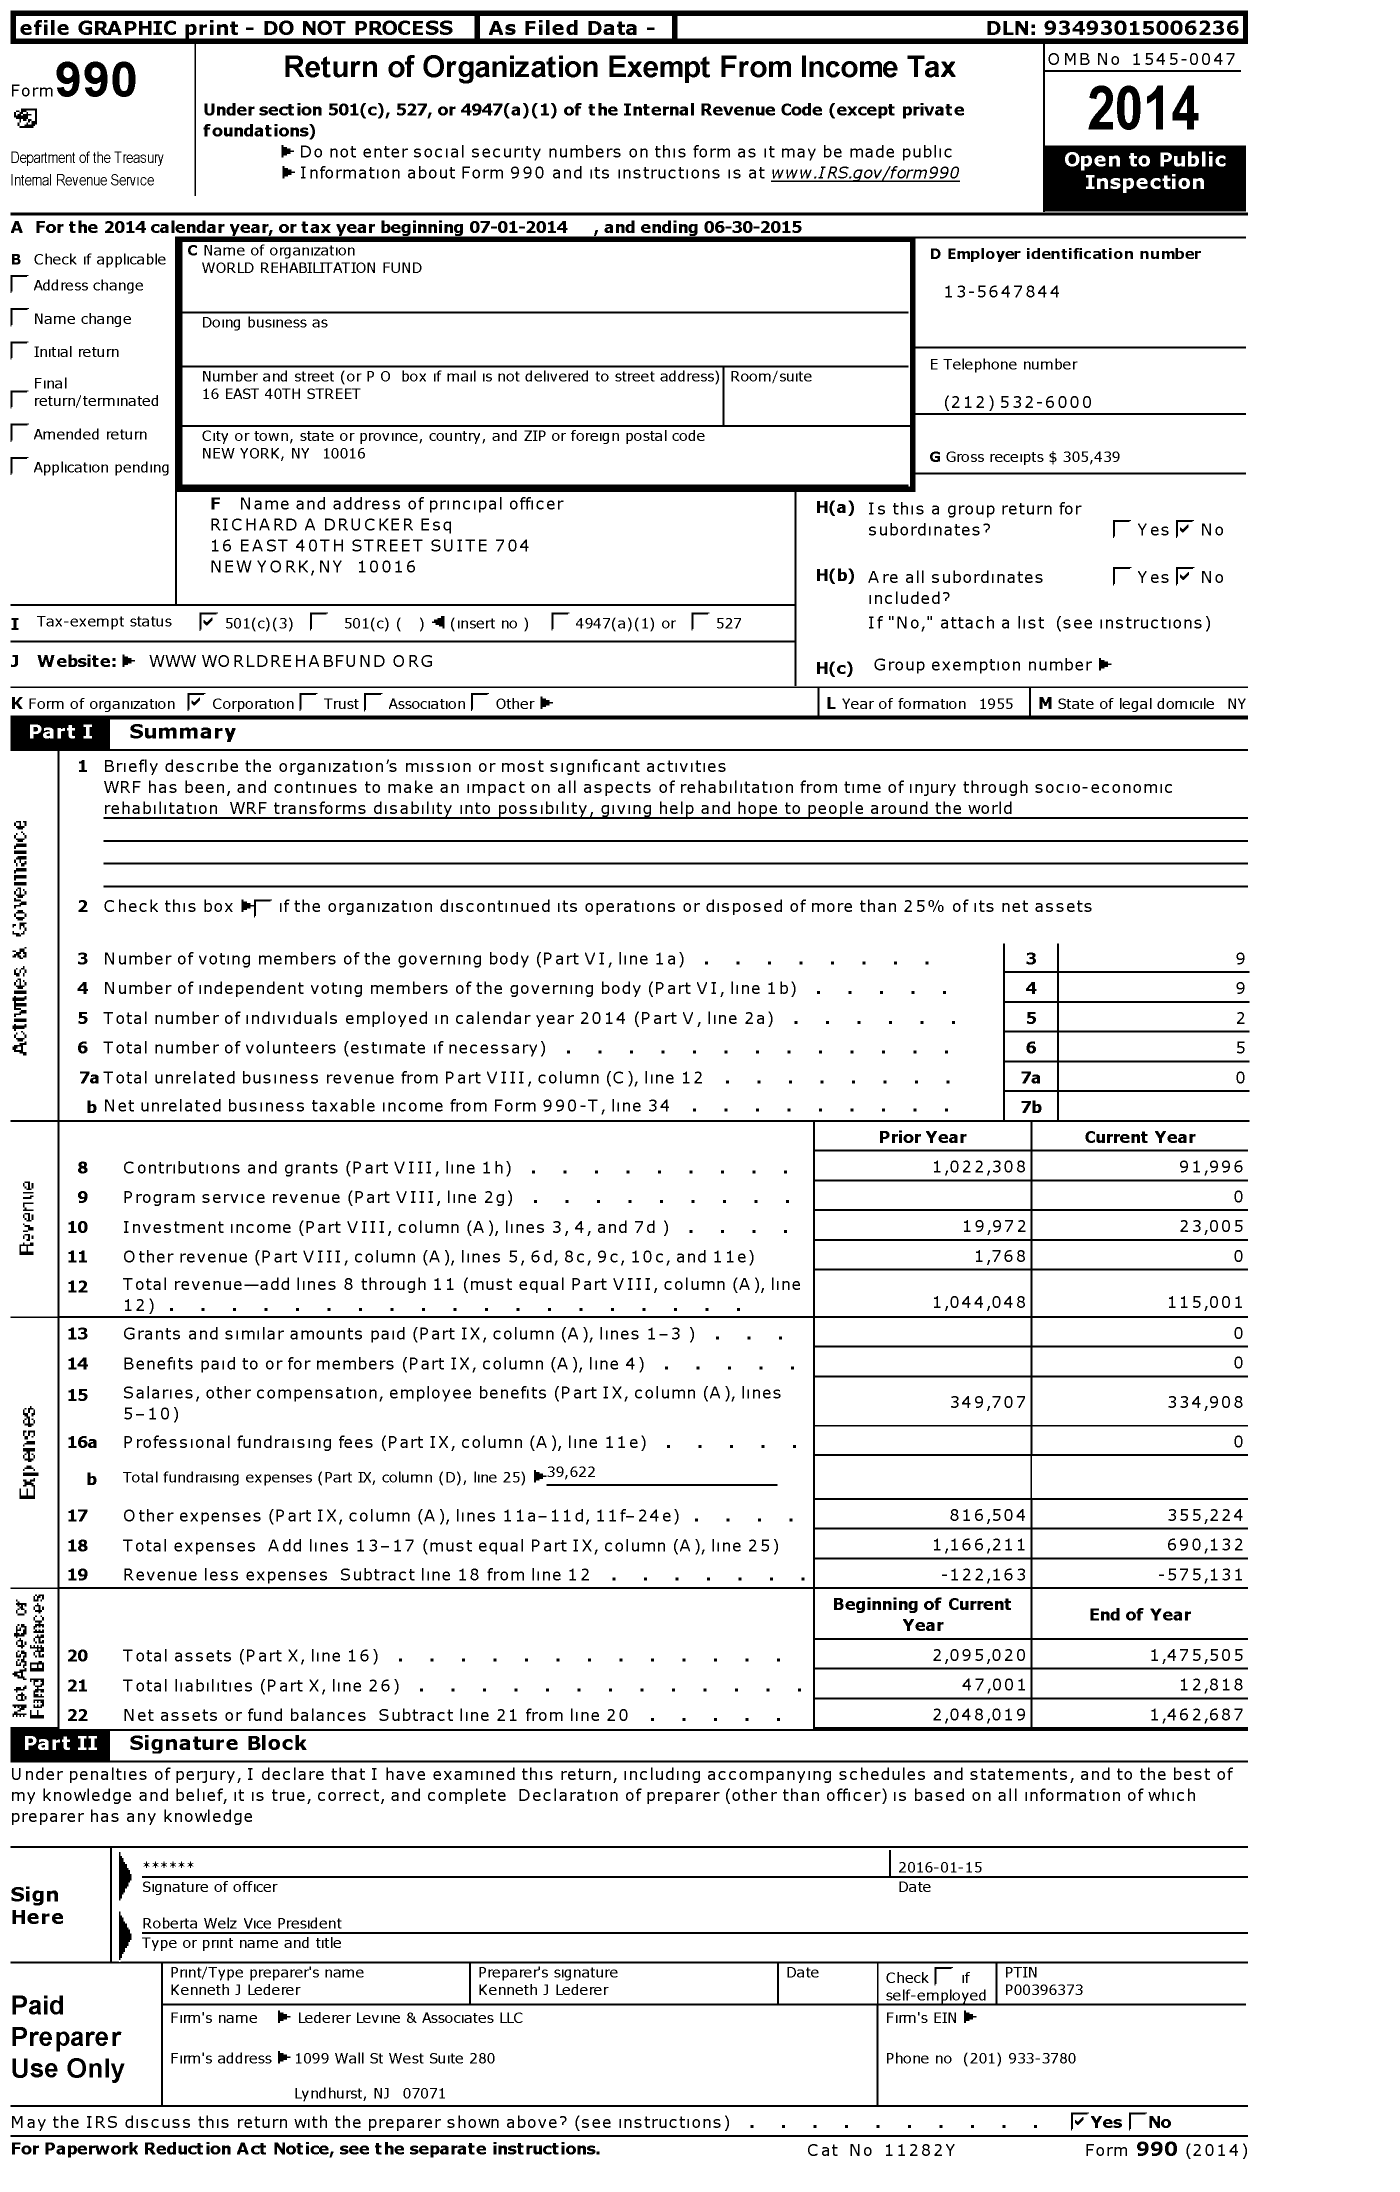 Image of first page of 2014 Form 990 for World Rehabilitation Fund (WRF)